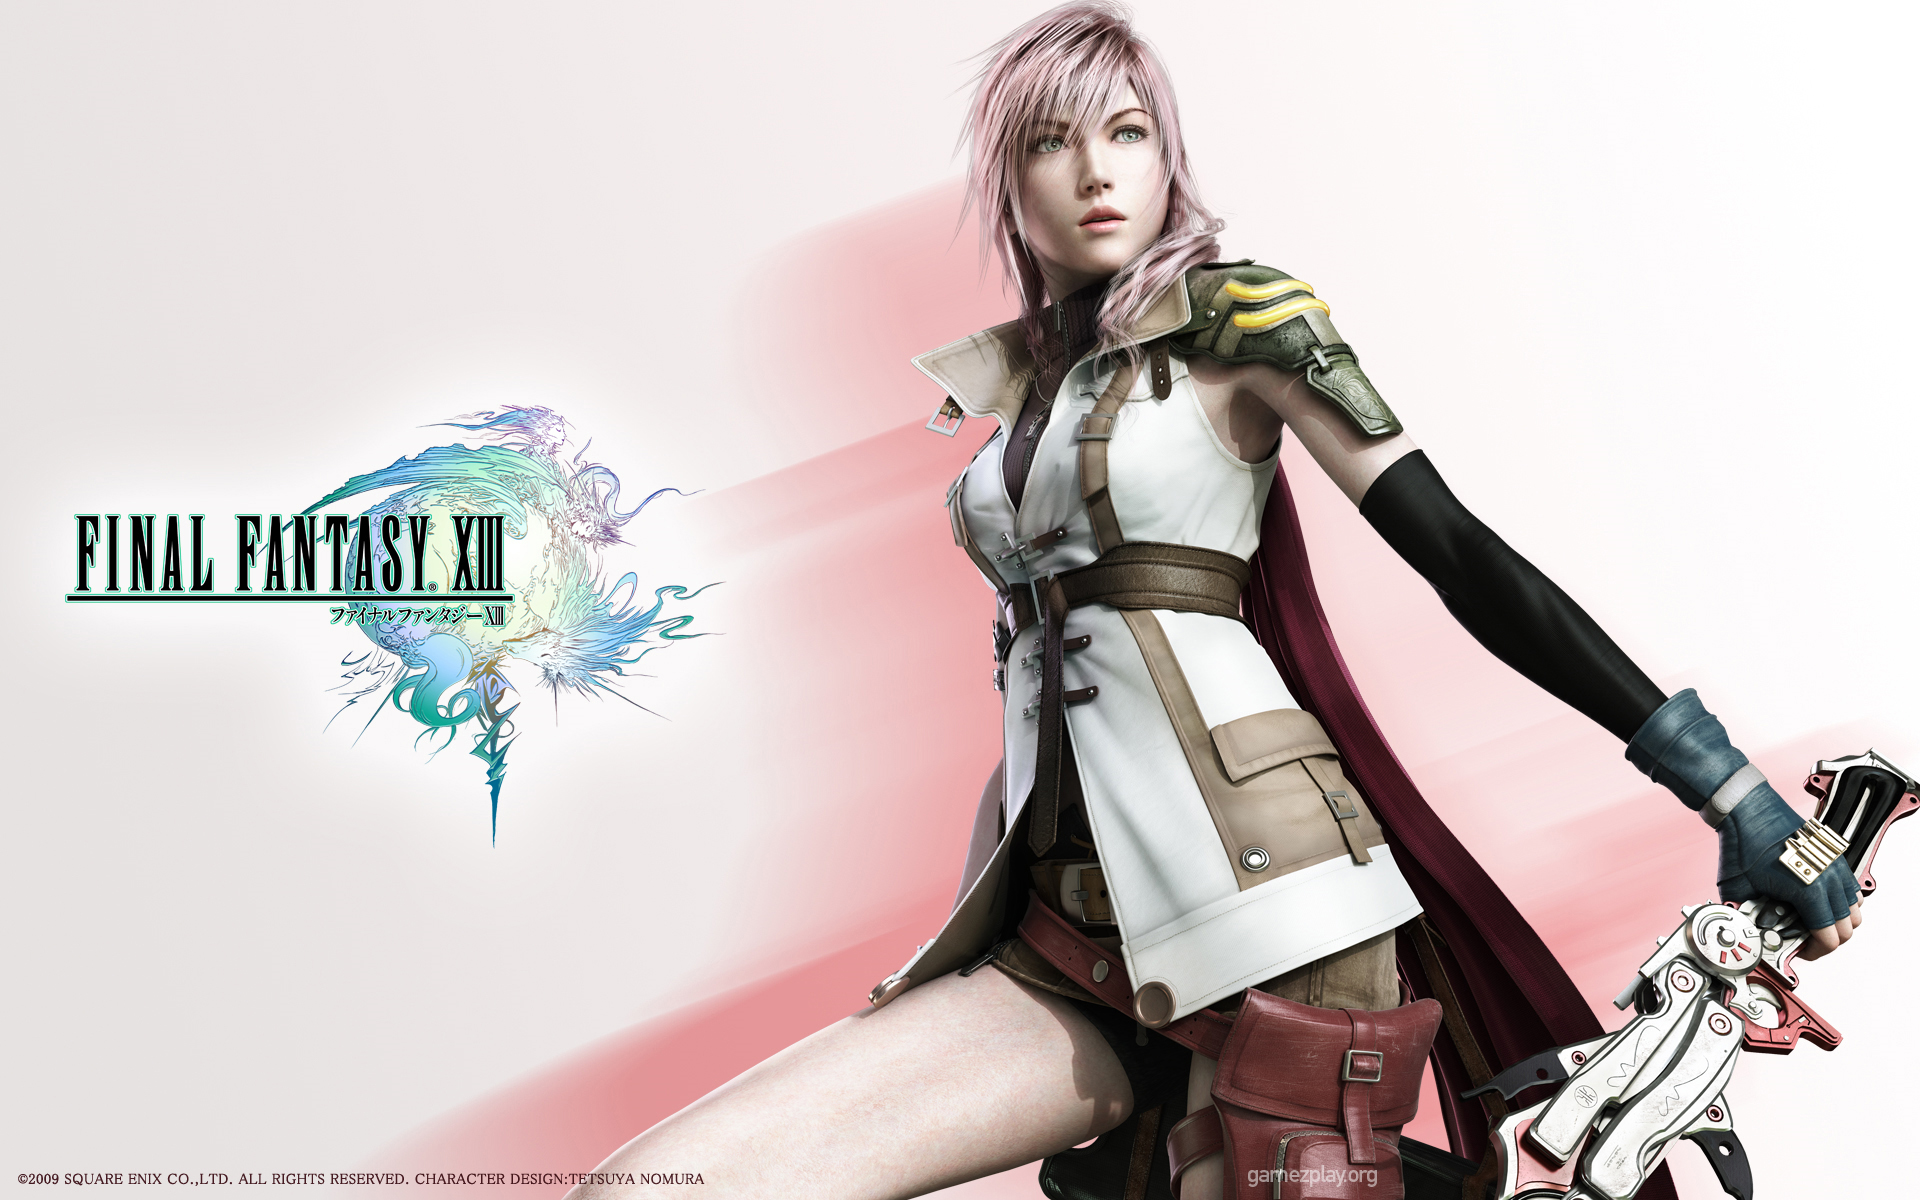 More Free Final Fantasy XIII wallpaper for PC and Mac here